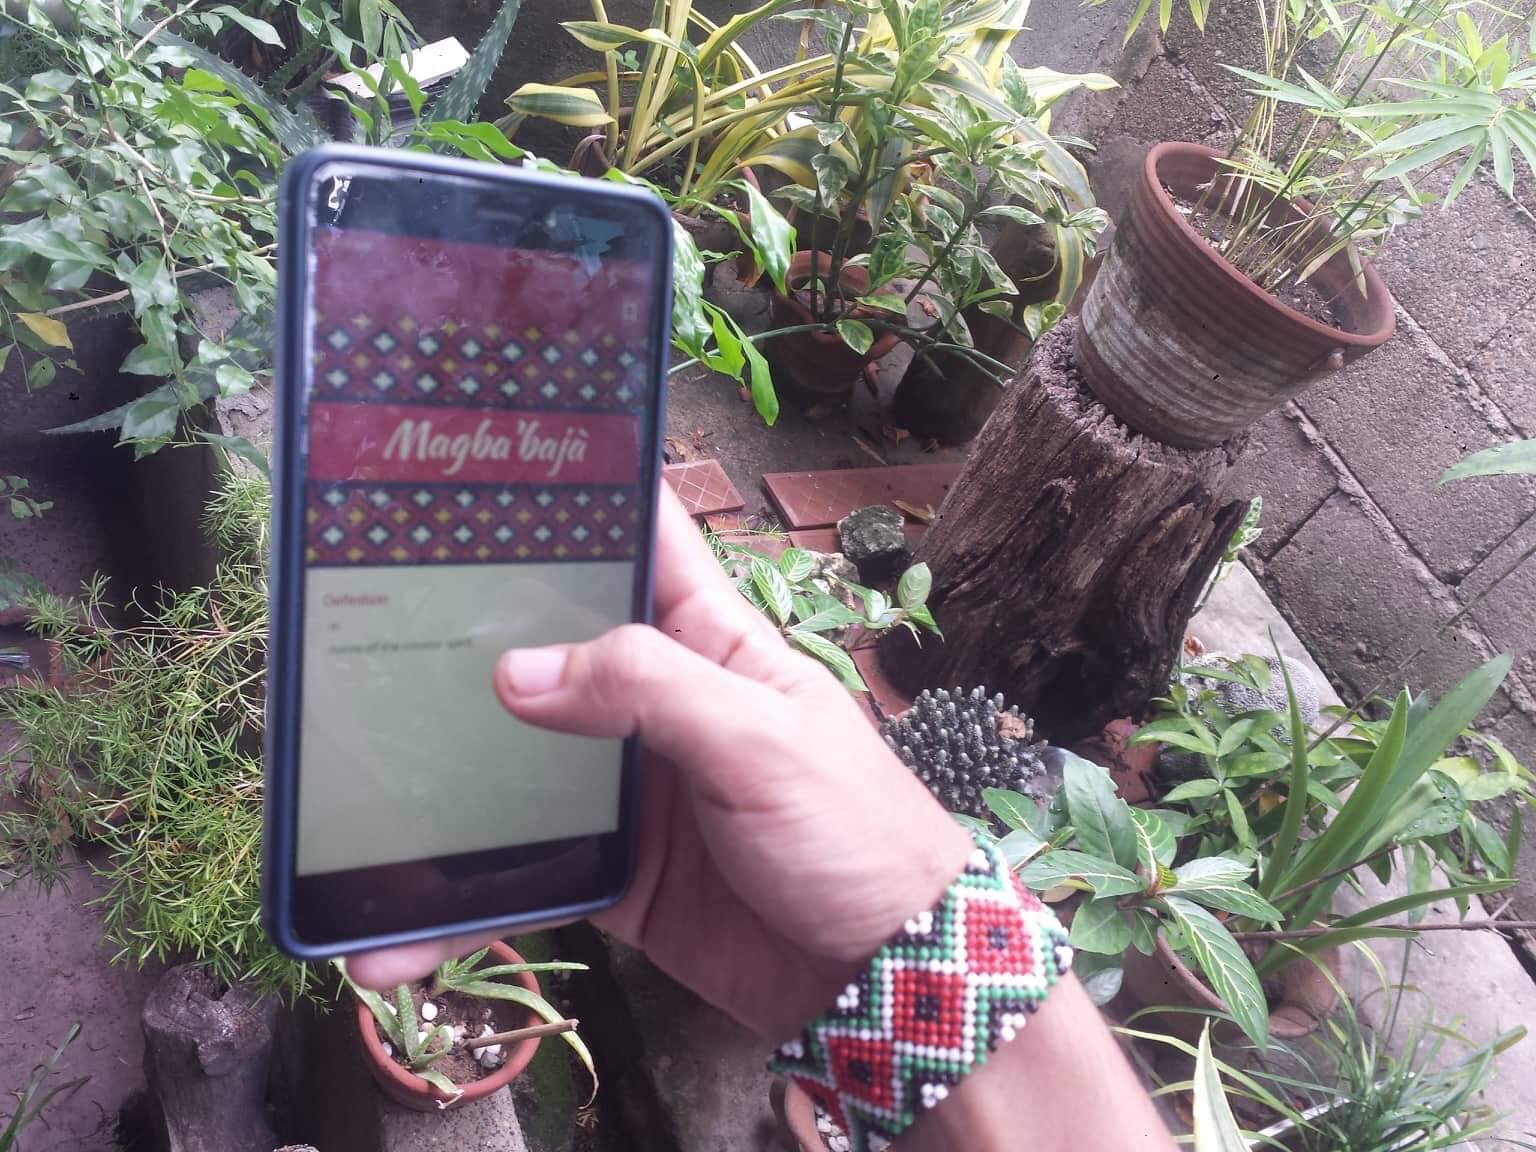 MANOBO DICTIONARY. The Save Our Schools (SOS) Network launched a mobile dictionary app in an effort to save the Manobo language. Photo by Chad Booc 